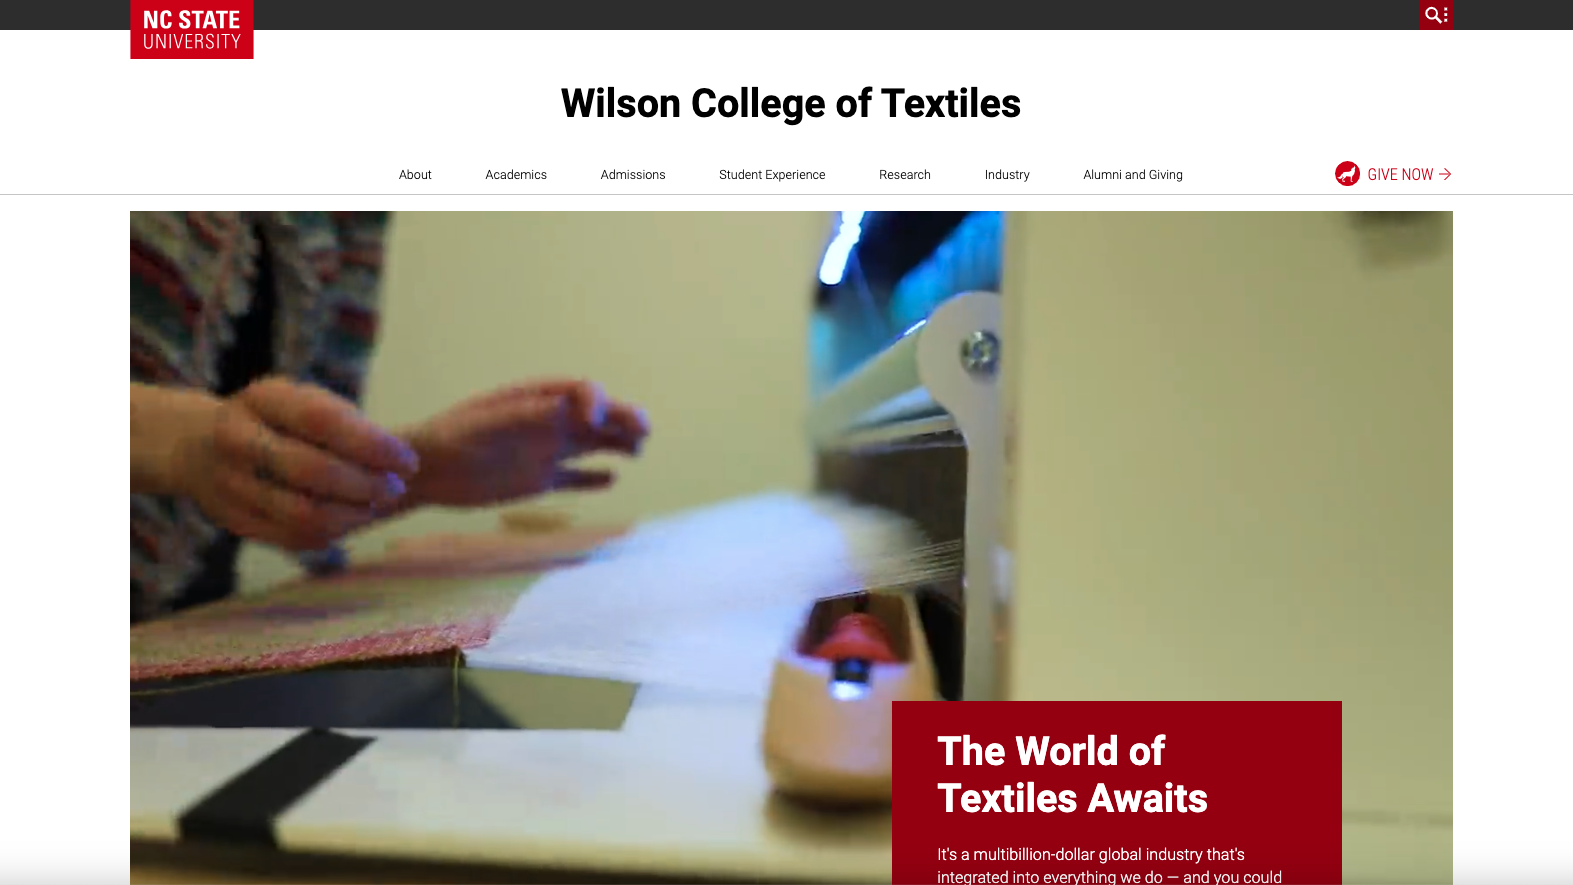 The homepage of the Wilson College of Textiles website.